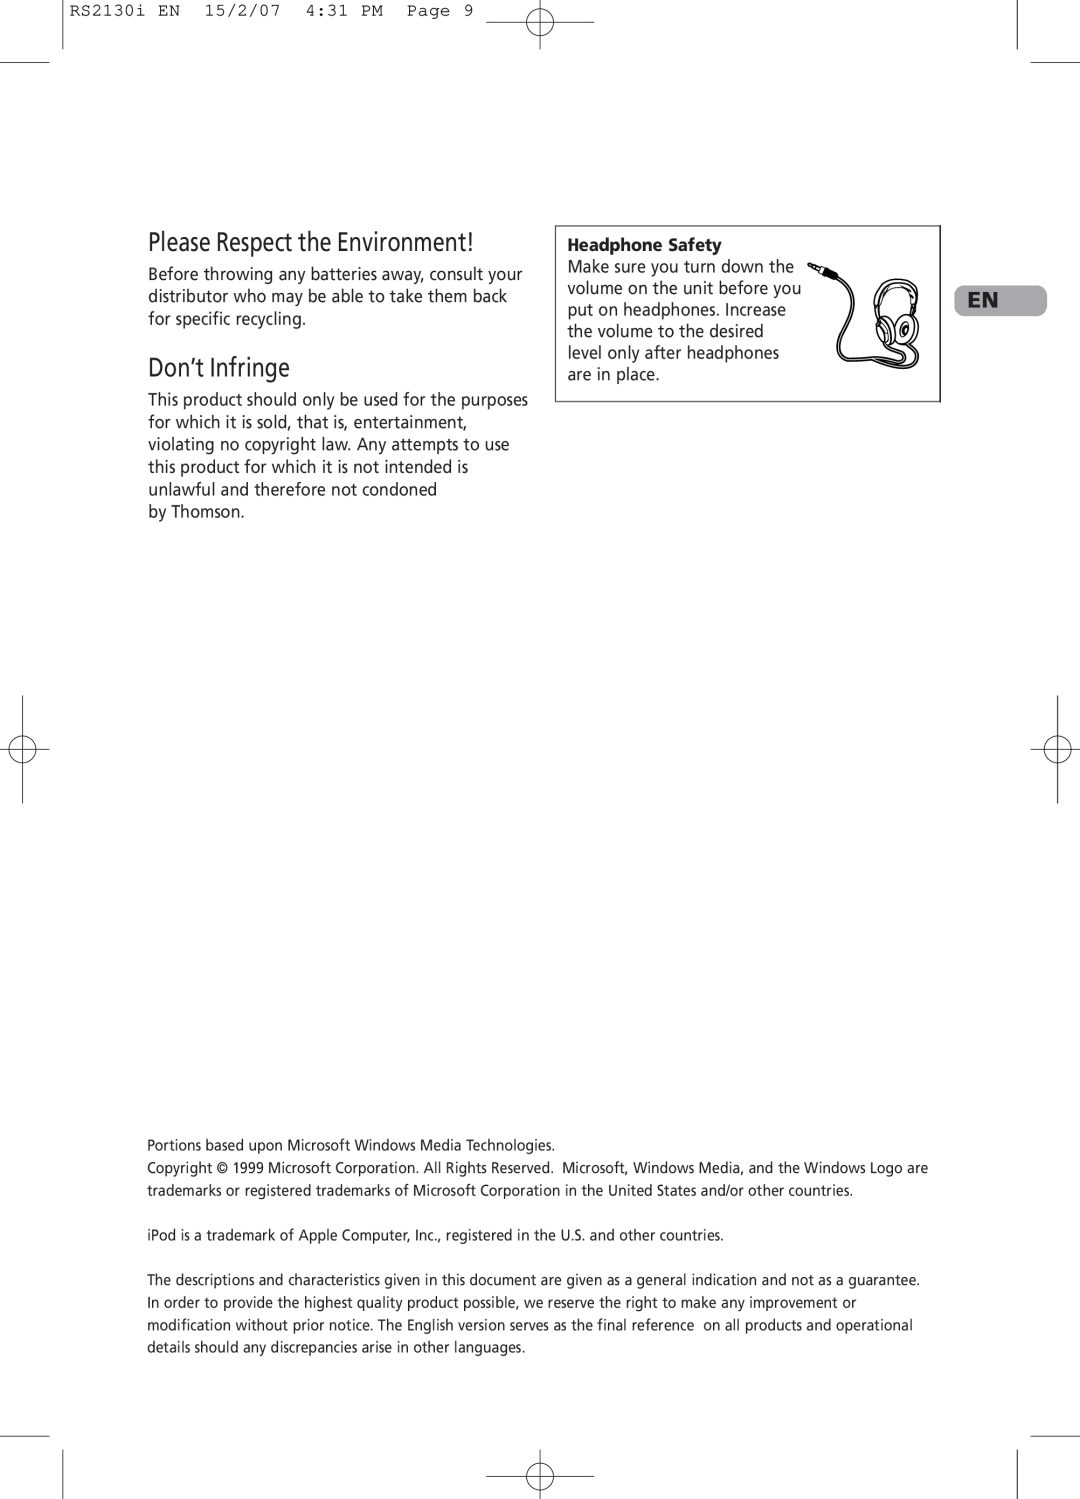 RCA RS2130i user manual Please Respect the Environment, Don’t Infringe, Headphone Safety 